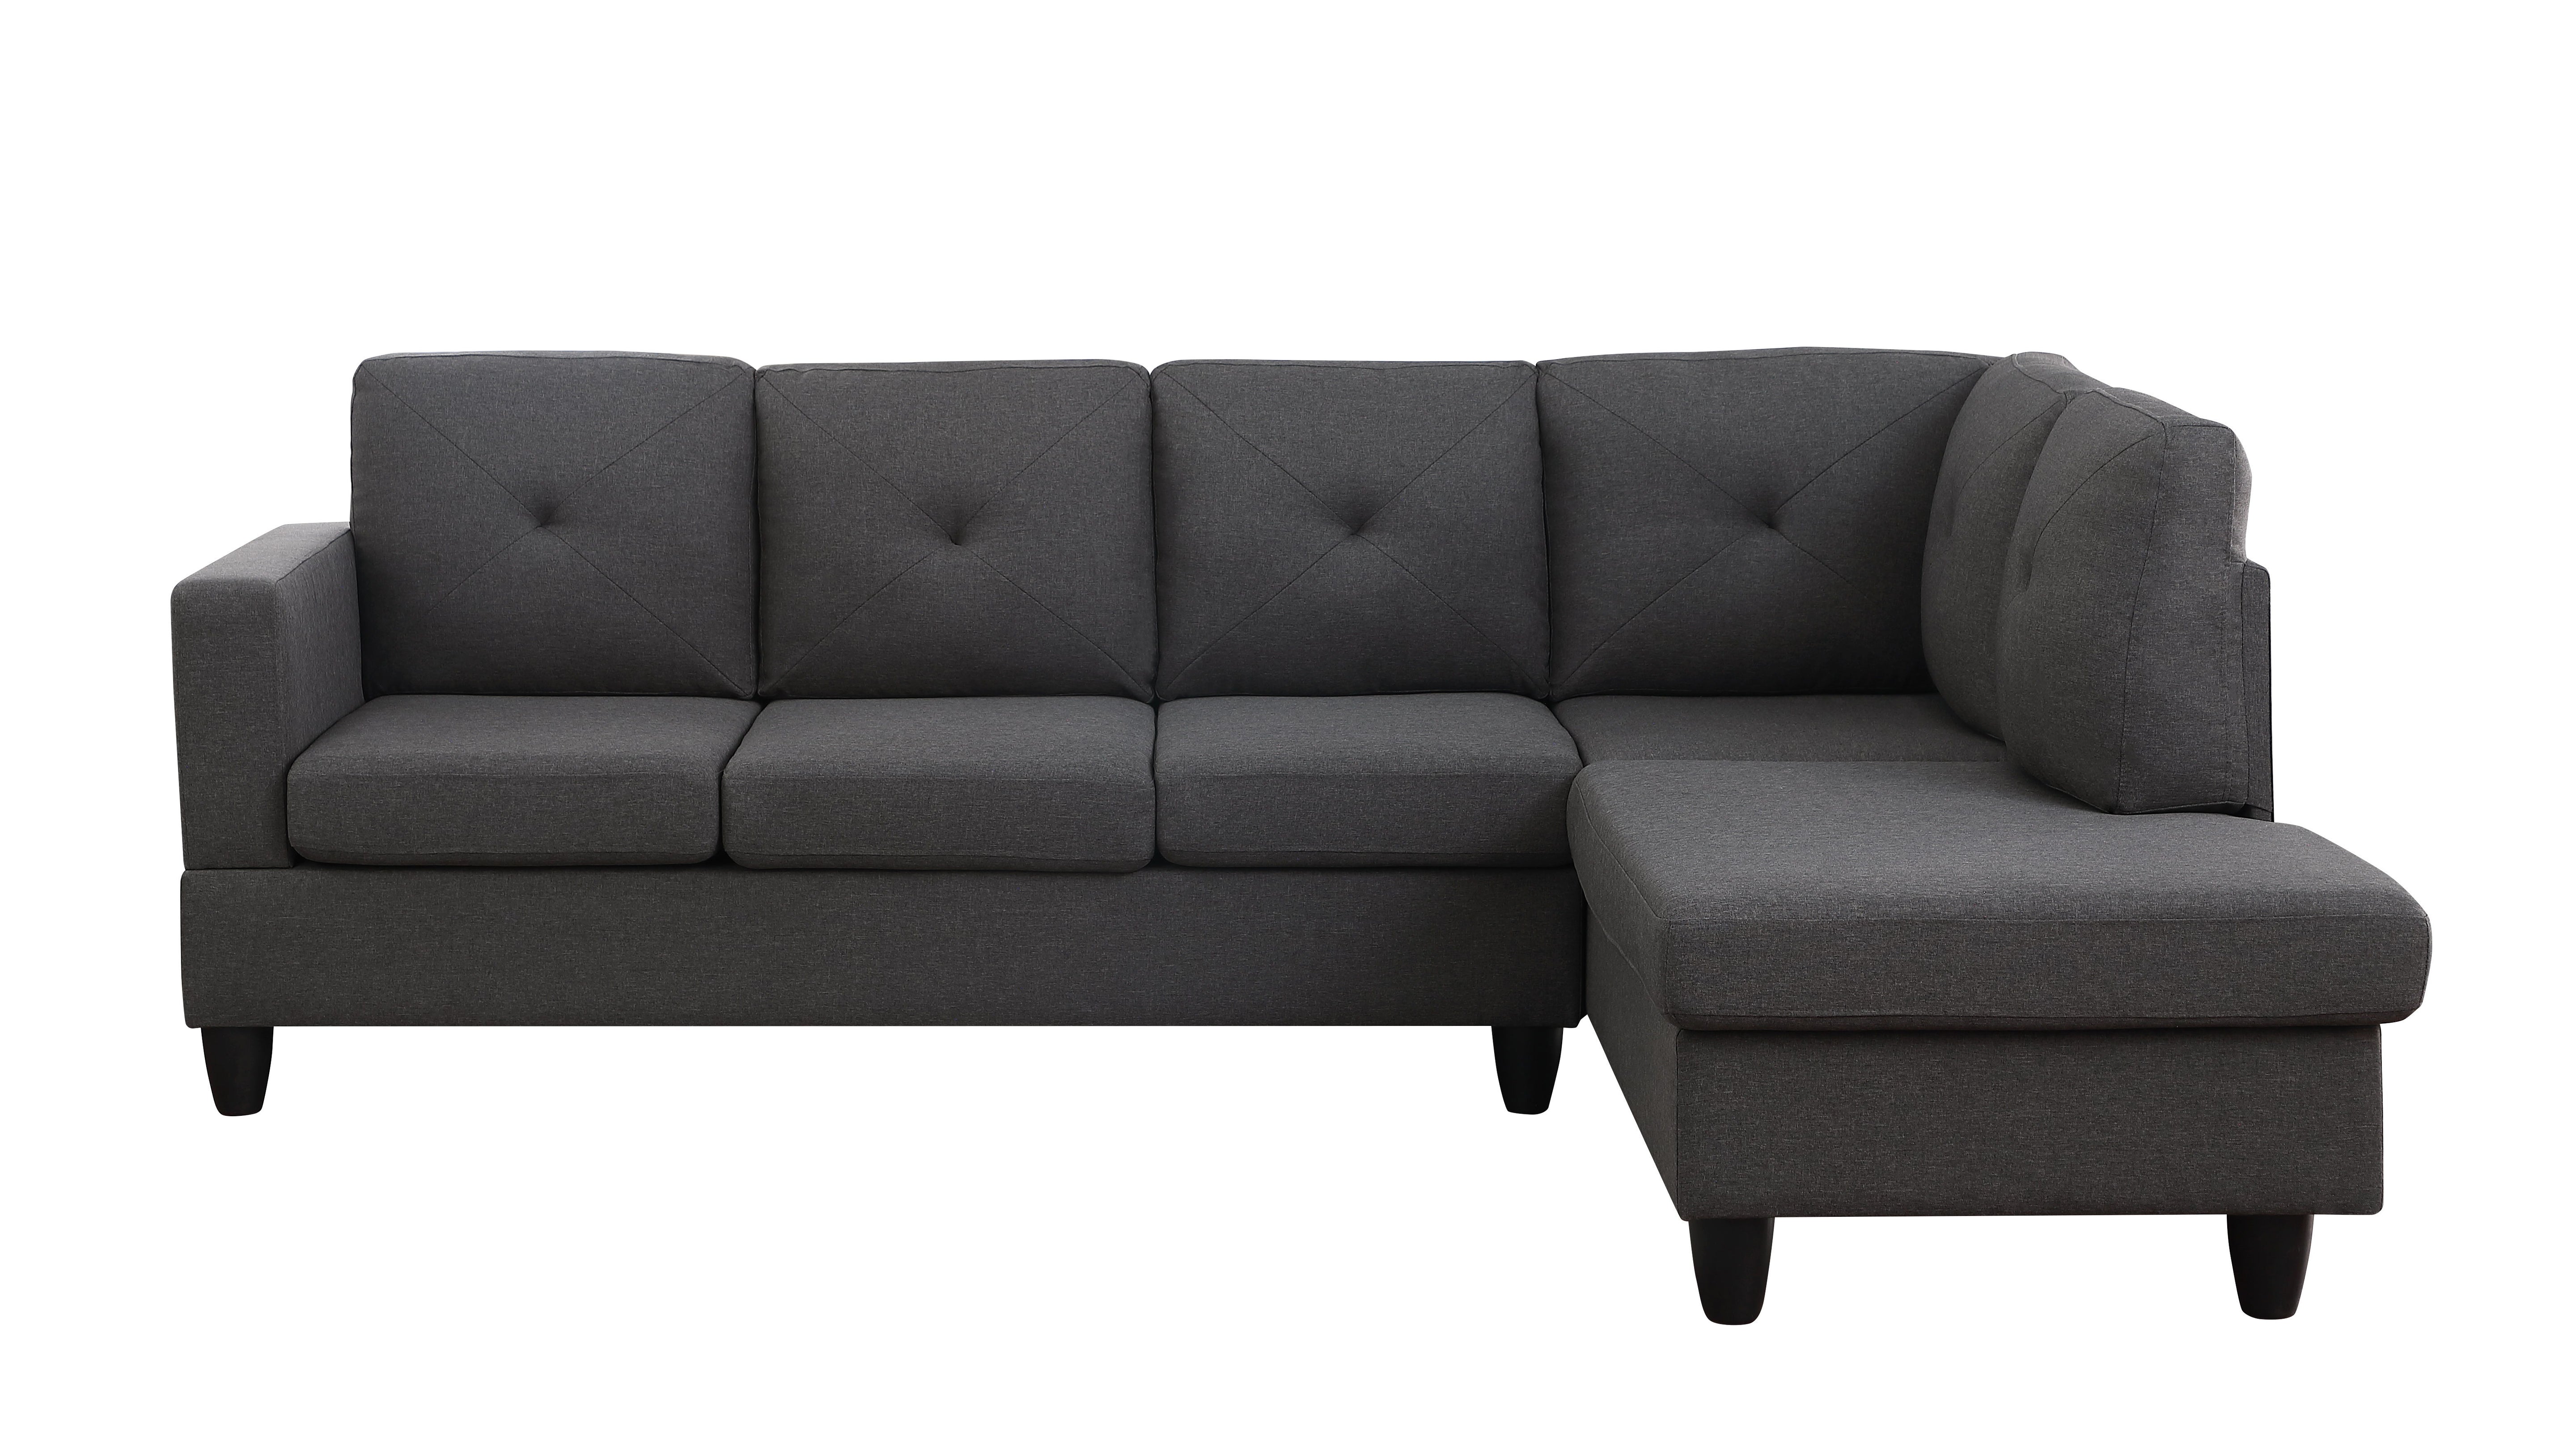 Santiago - Linen Sectional Sofa With Right Facing Chaise